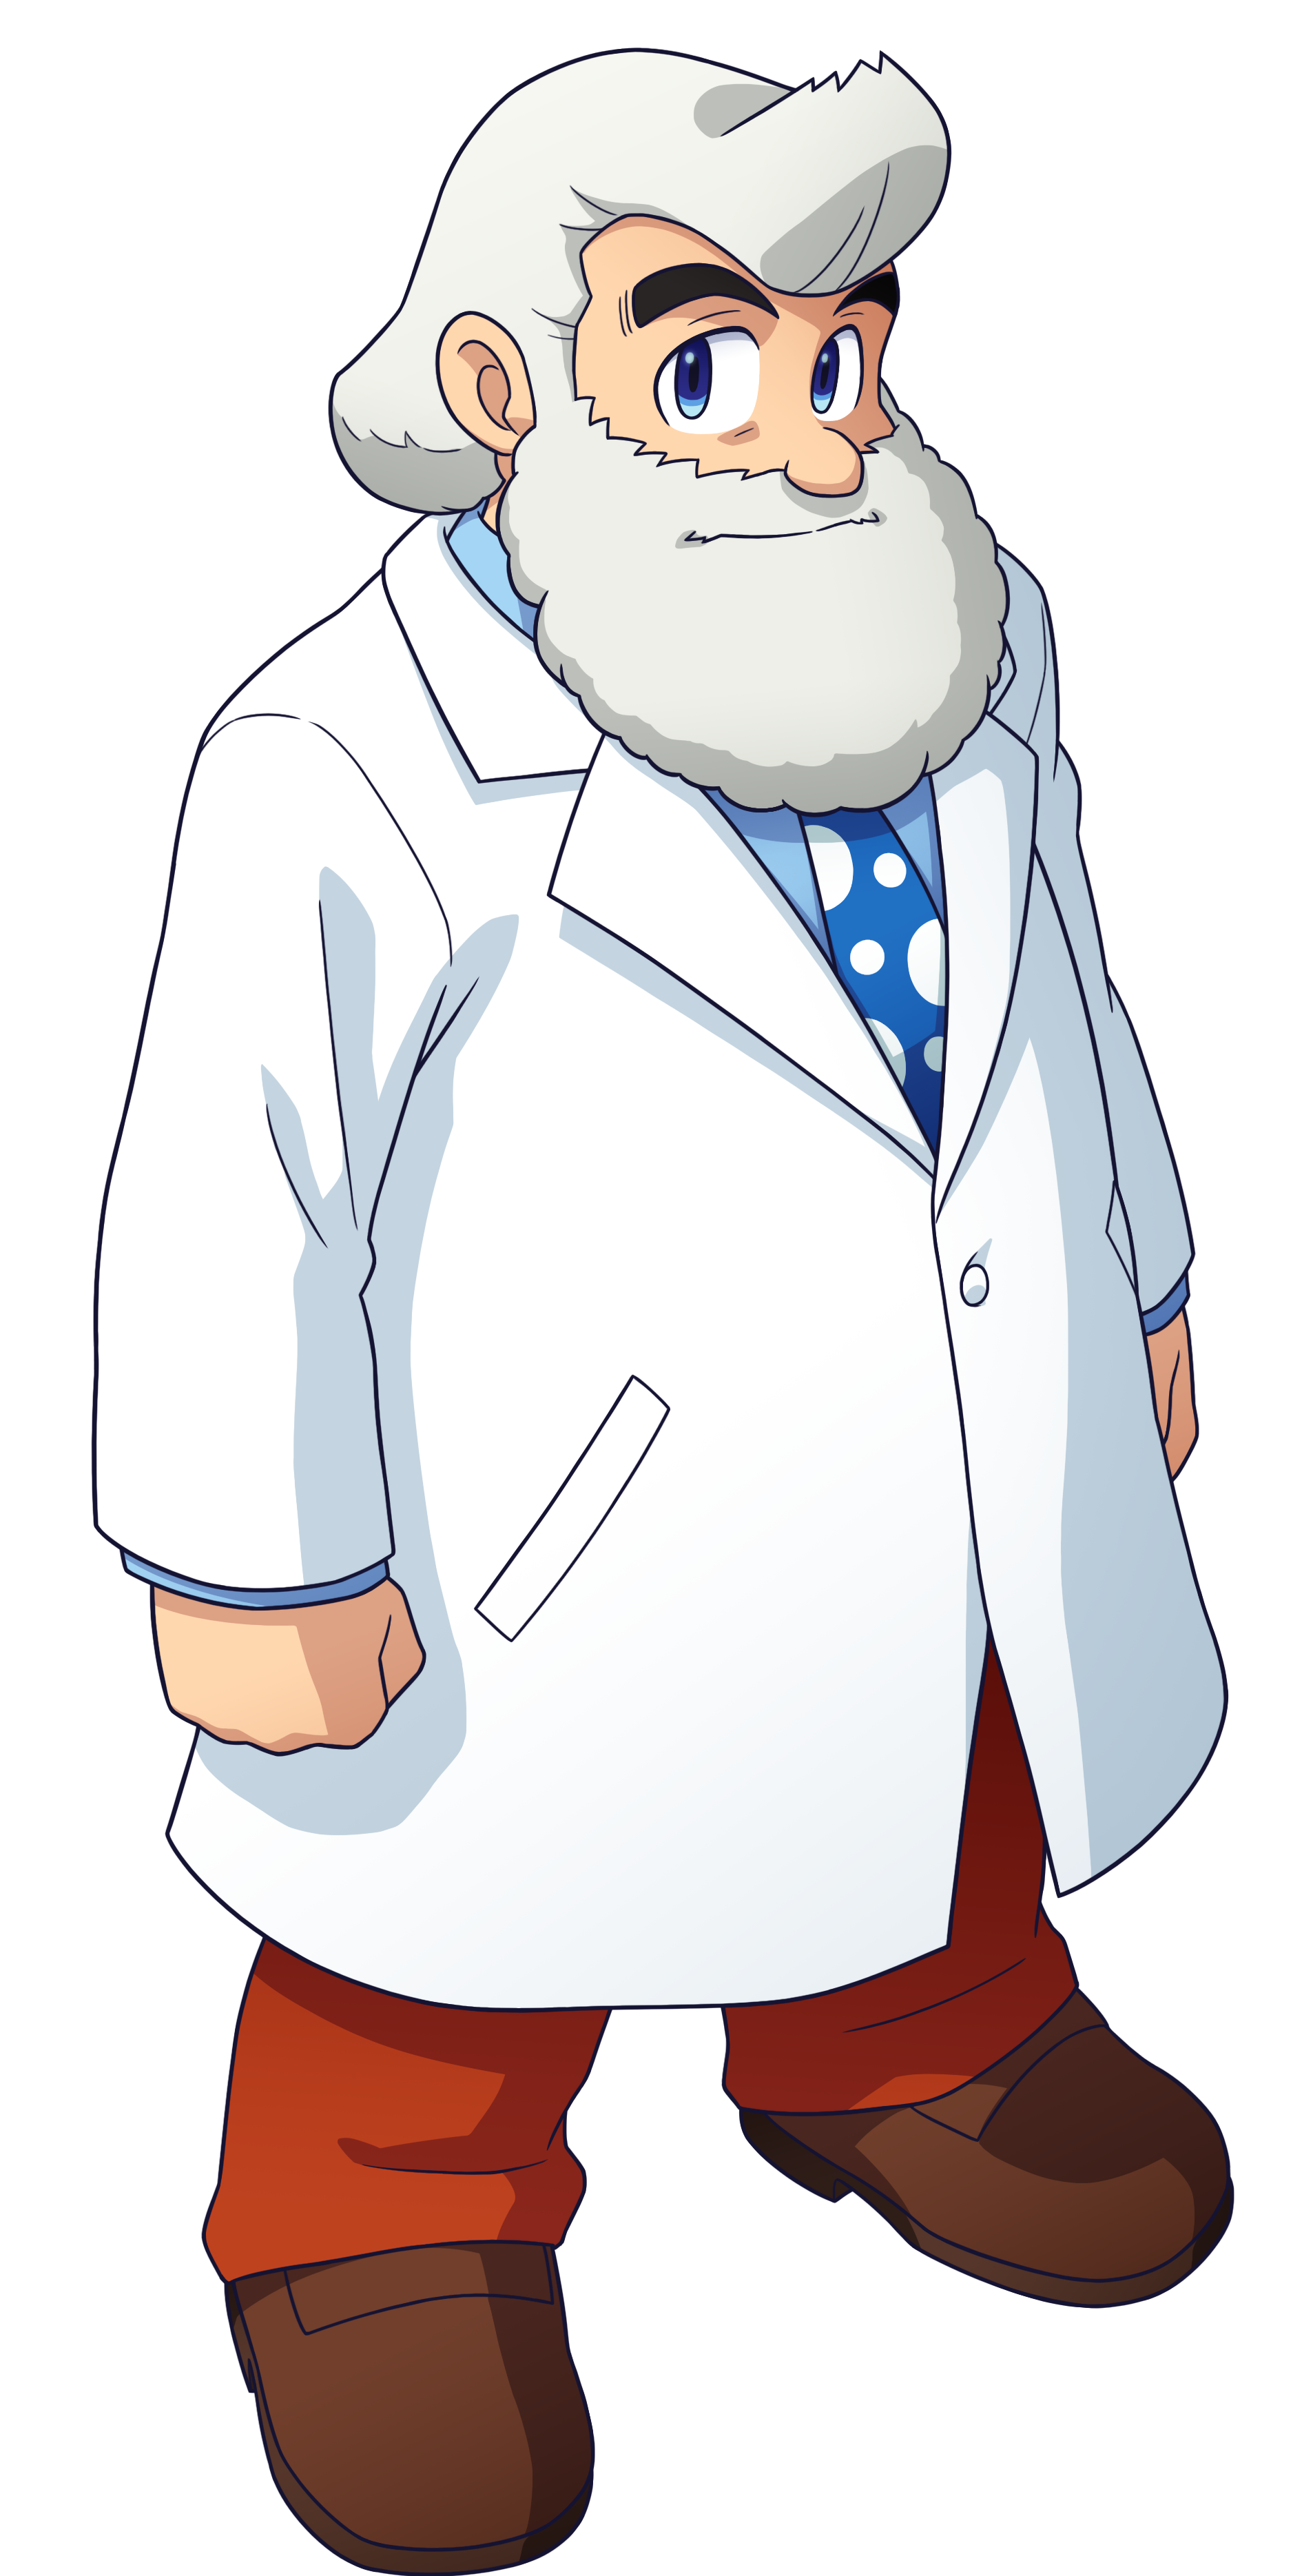 Doctor Thomas Light is one of the major characters from the Mega Man franch...